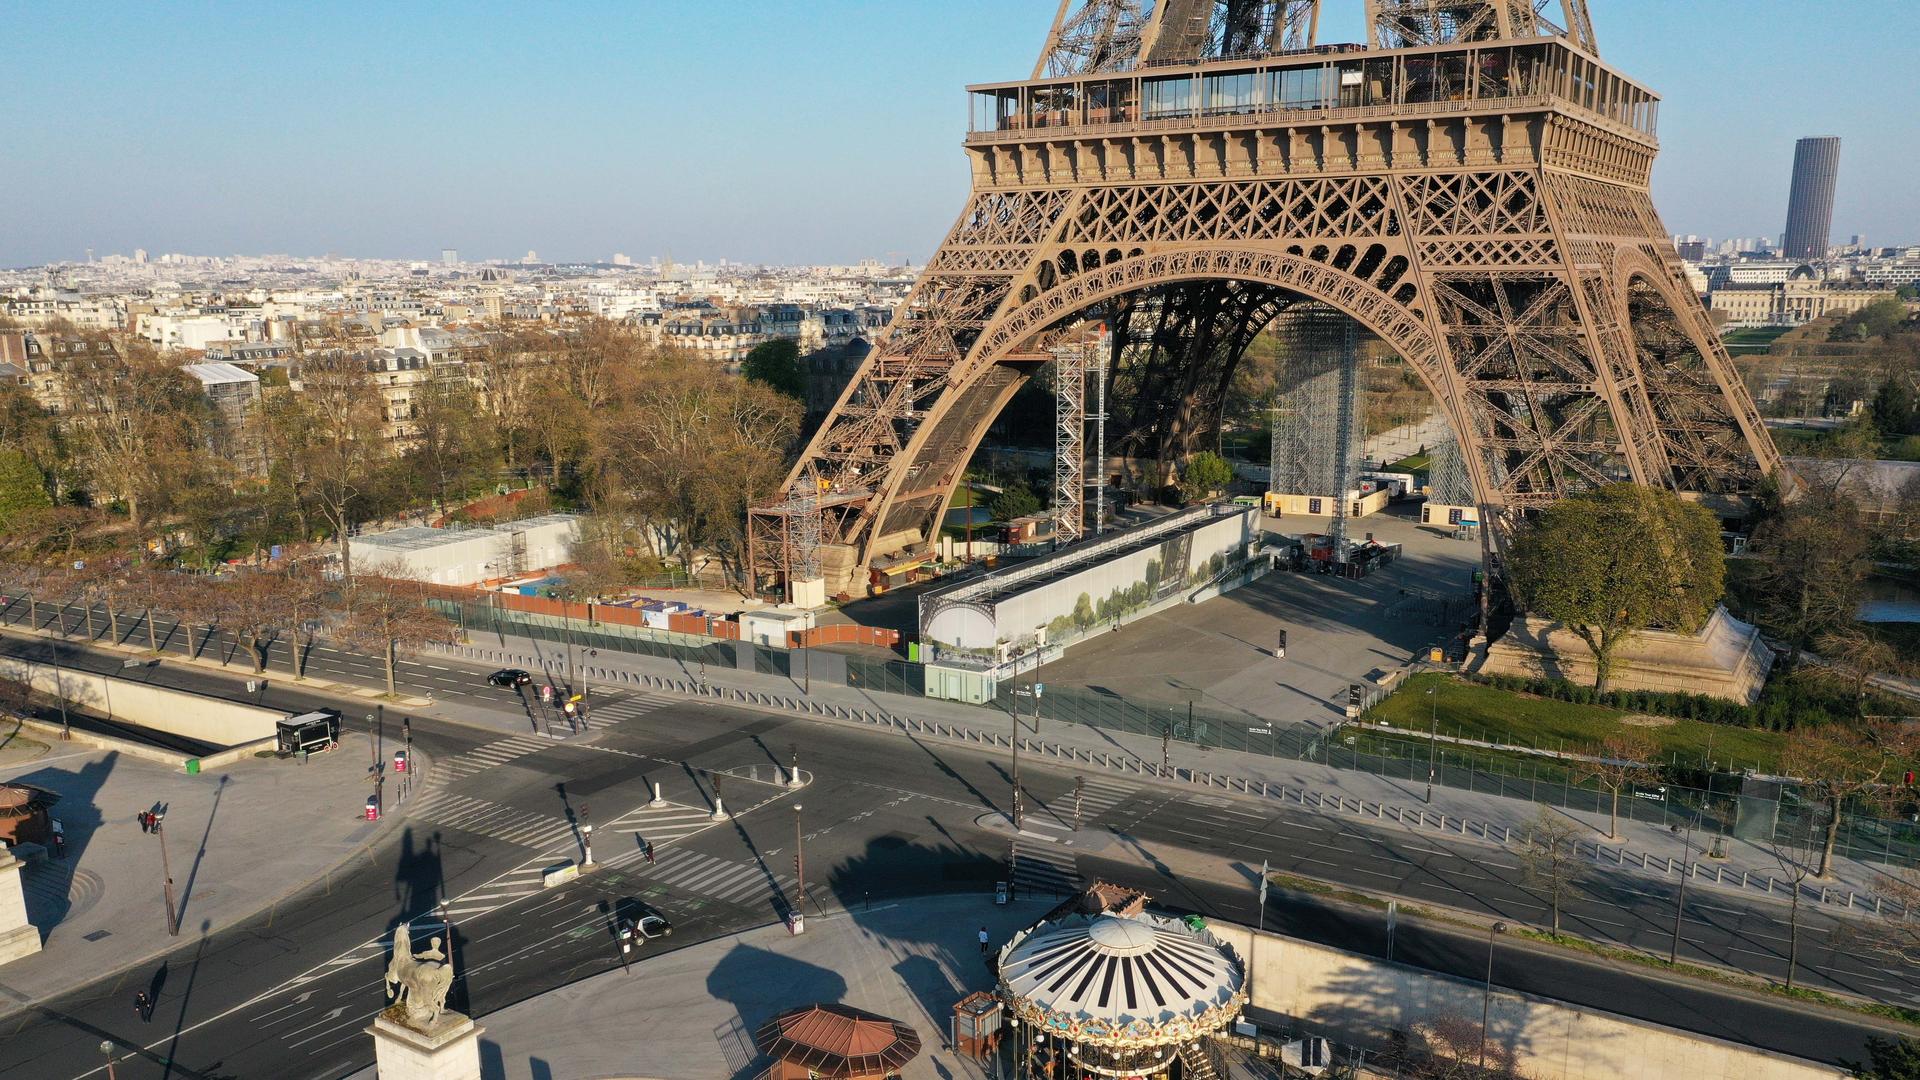 An aerial view shows the deserted Eiffel tower in Paris during a lockdown imposed to slow the spread of the coronavirus disease (COVID-19) in France, April 1, 2020.